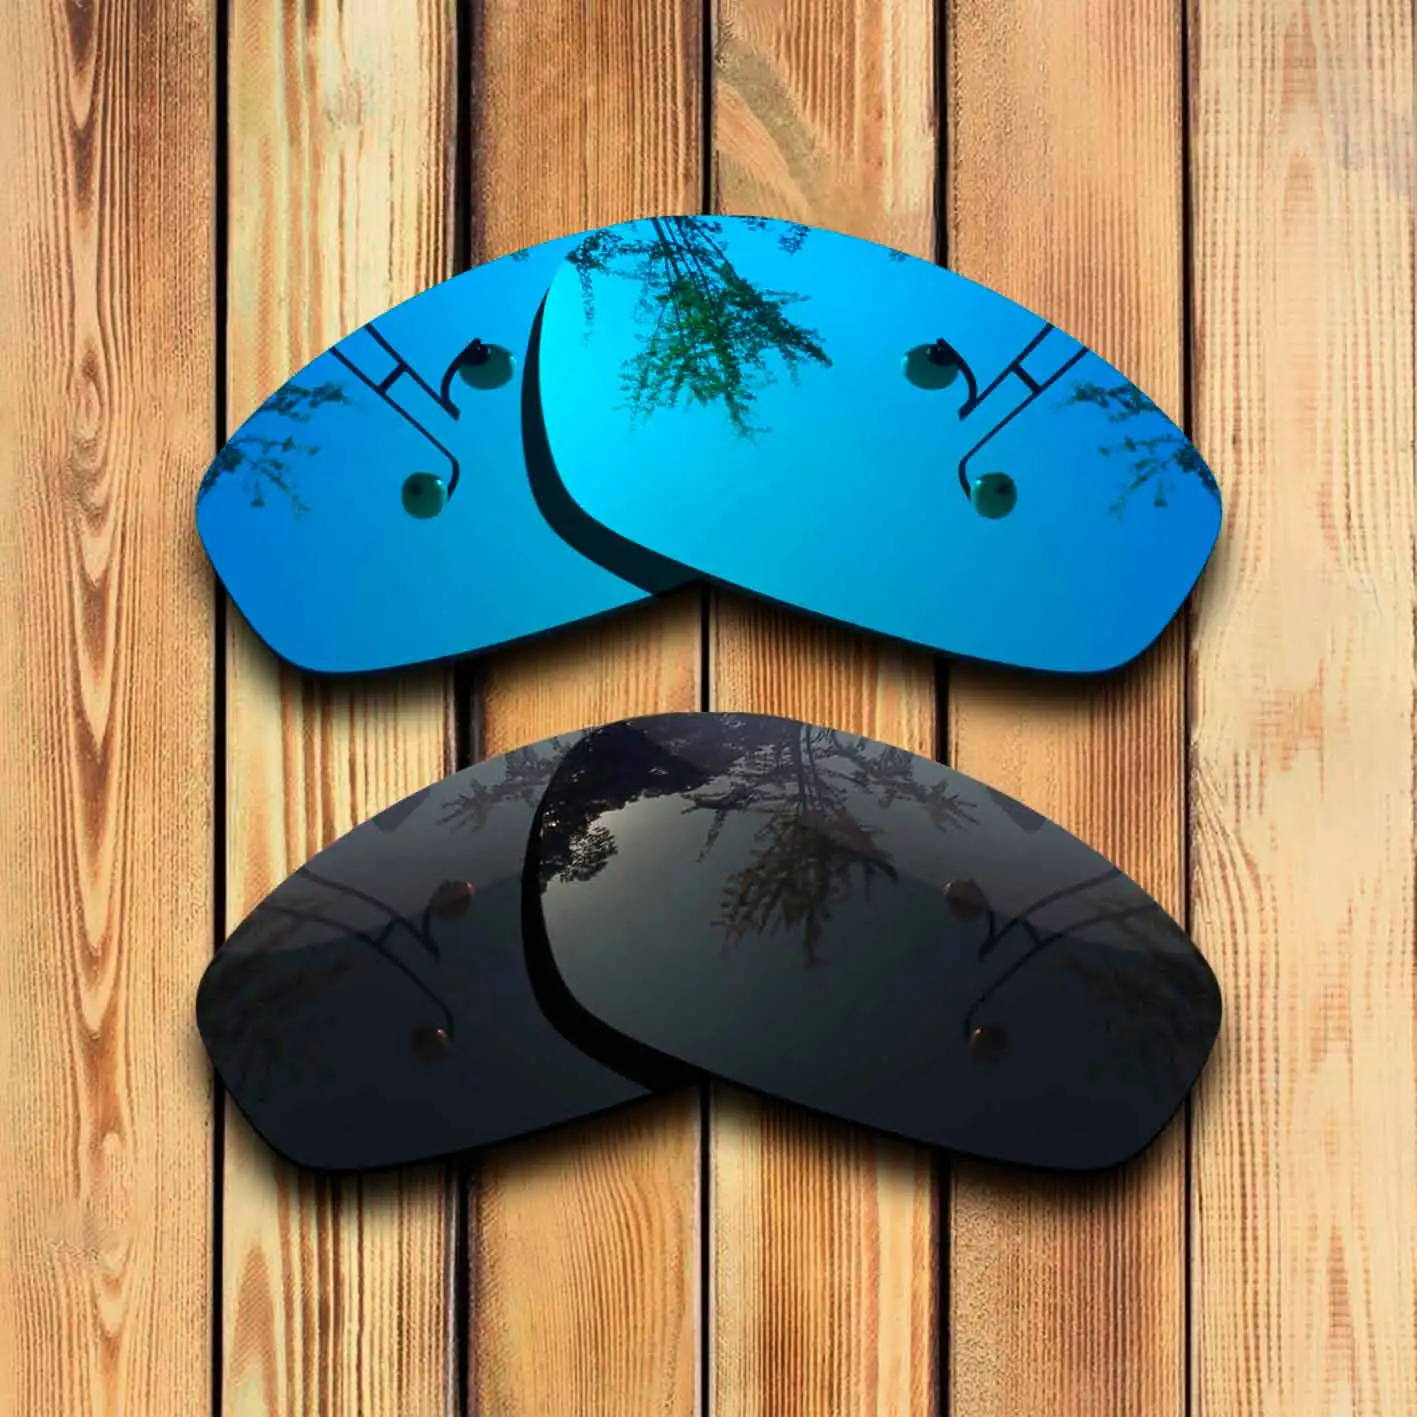 

100% Precisely Cut Polarized Replacement Lenses for BLENDER Sunglasses Blue& Solid Black Combine Options